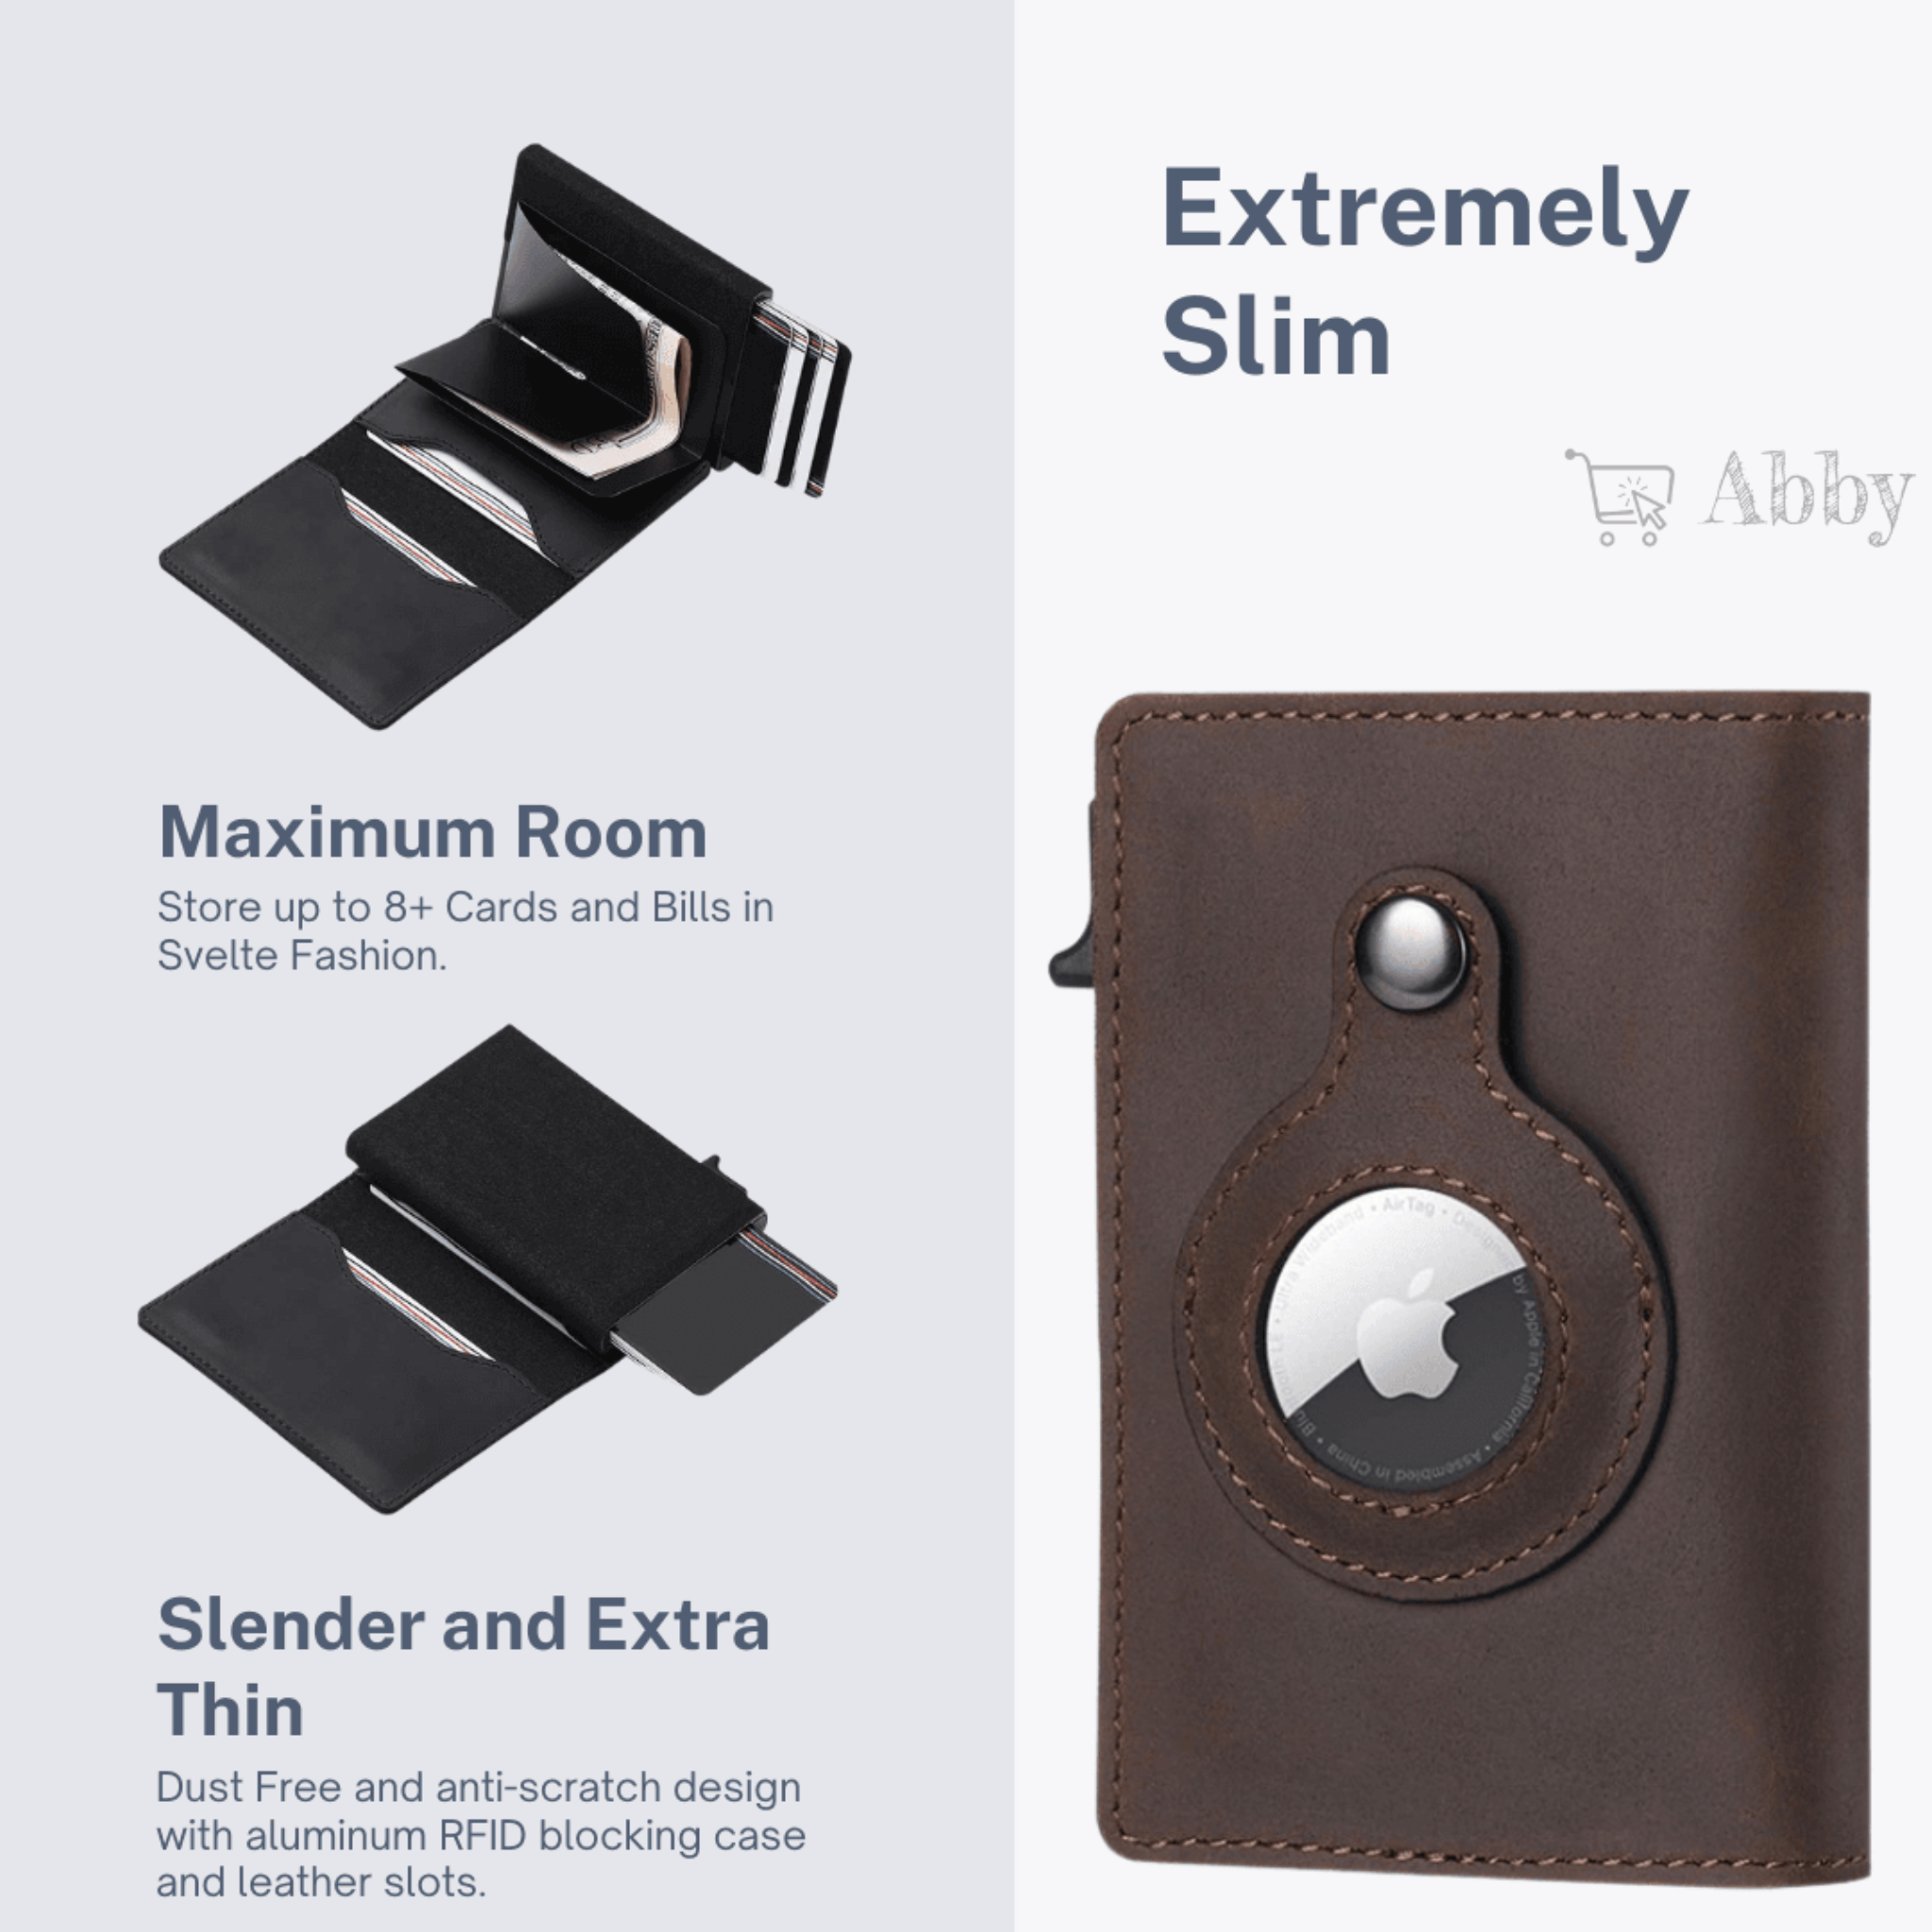 Abby's™ Anti-Lost Slim Wallet with Apple AirTag Case - RFID Protection - Abbycart